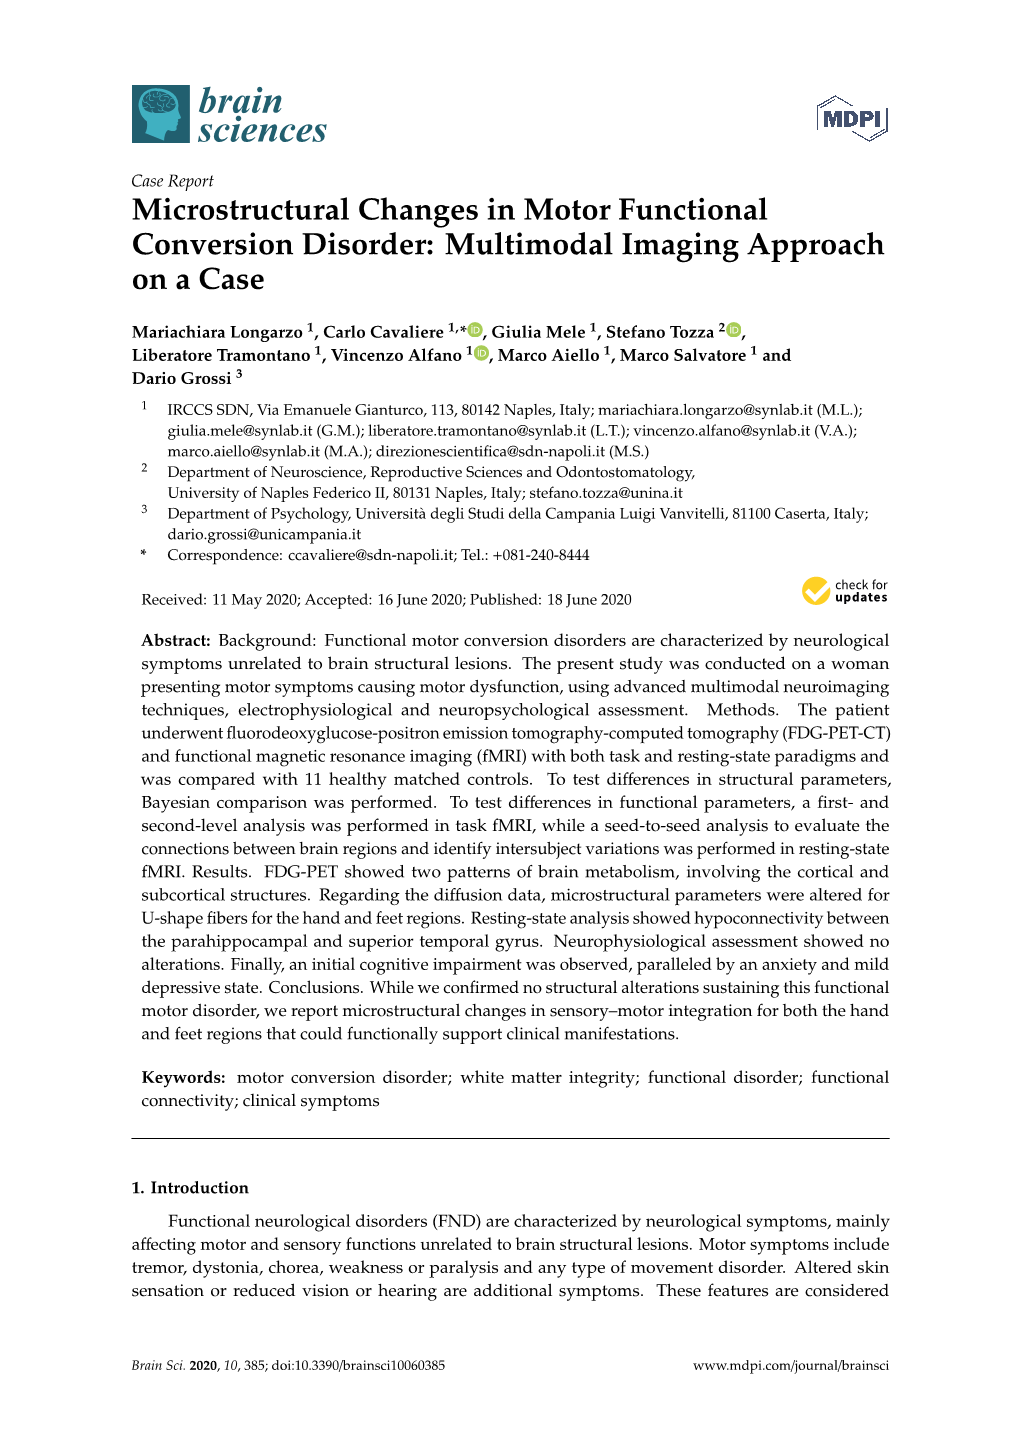 Microstructural Changes in Motor Functional Conversion Disorder: Multimodal Imaging Approach on a Case